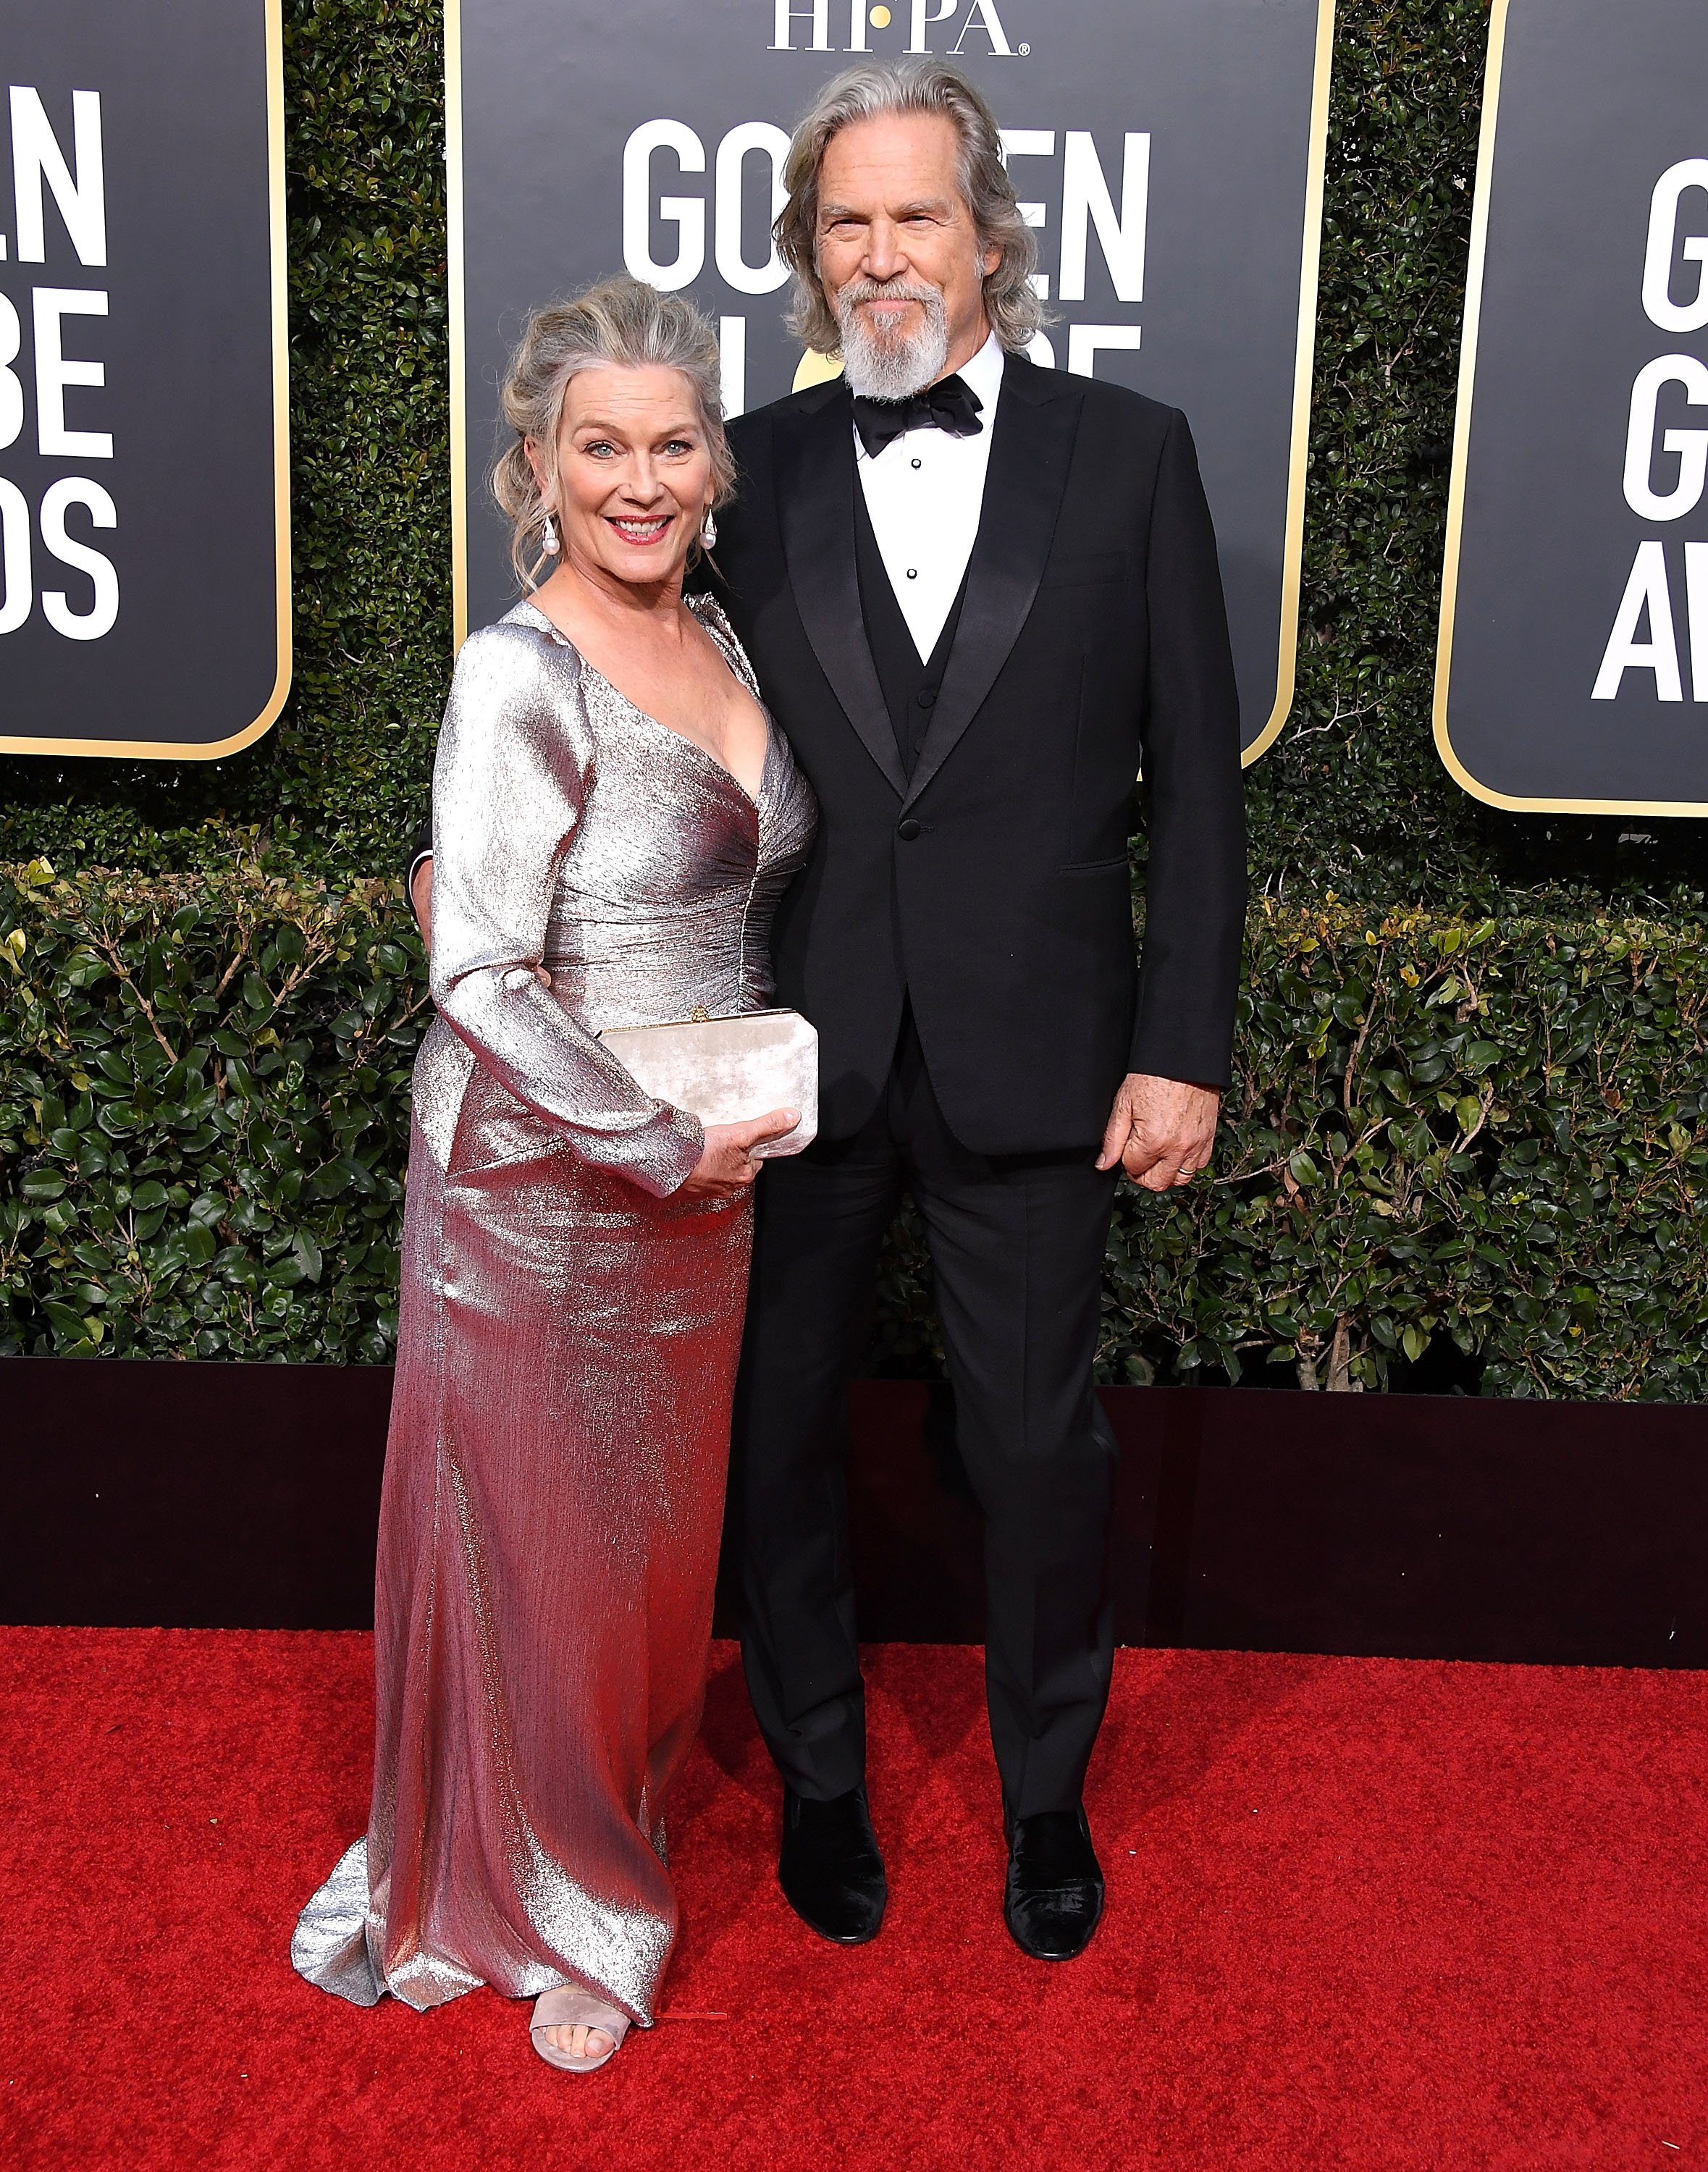  Susan Geston, Jeff Bridges arrives at the 76th Annual Golden Globe Awardsat The Beverly Hilton Hotel on January 6, 2019 in Beverly Hills, California. | Source: Getty Images